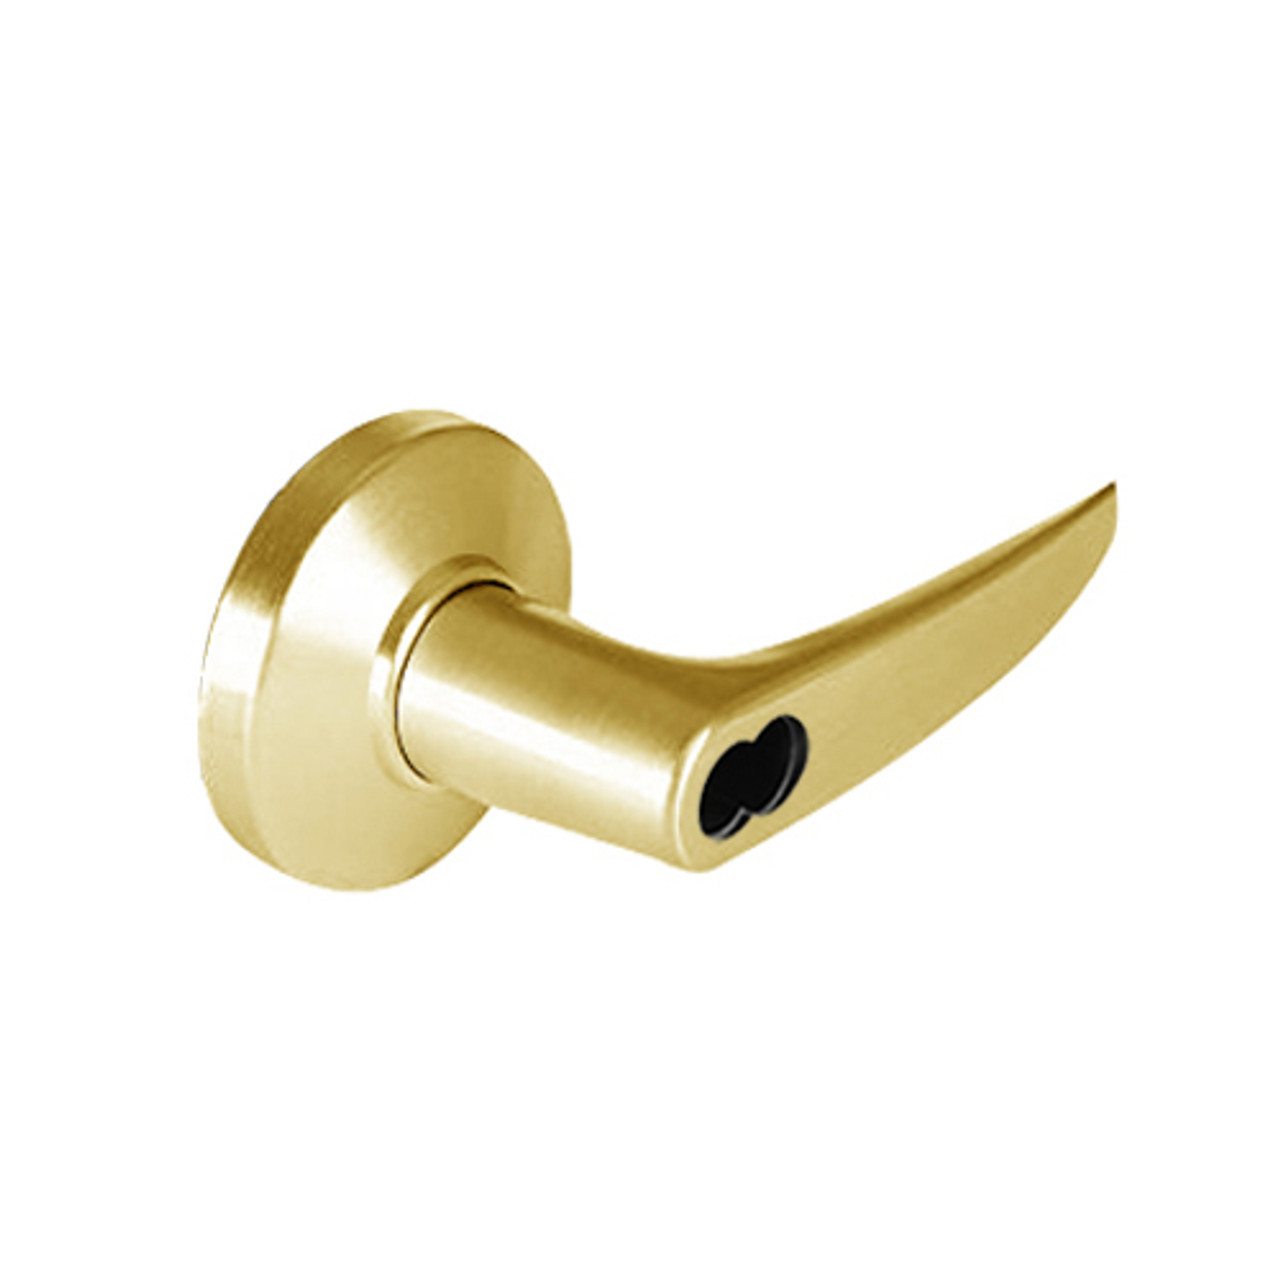 9K57T16CSTK605LM Best 9K Series Dormitory Cylindrical Lever Locks with Curved without Return Lever Design Accept 7 Pin Best Core in Bright Brass